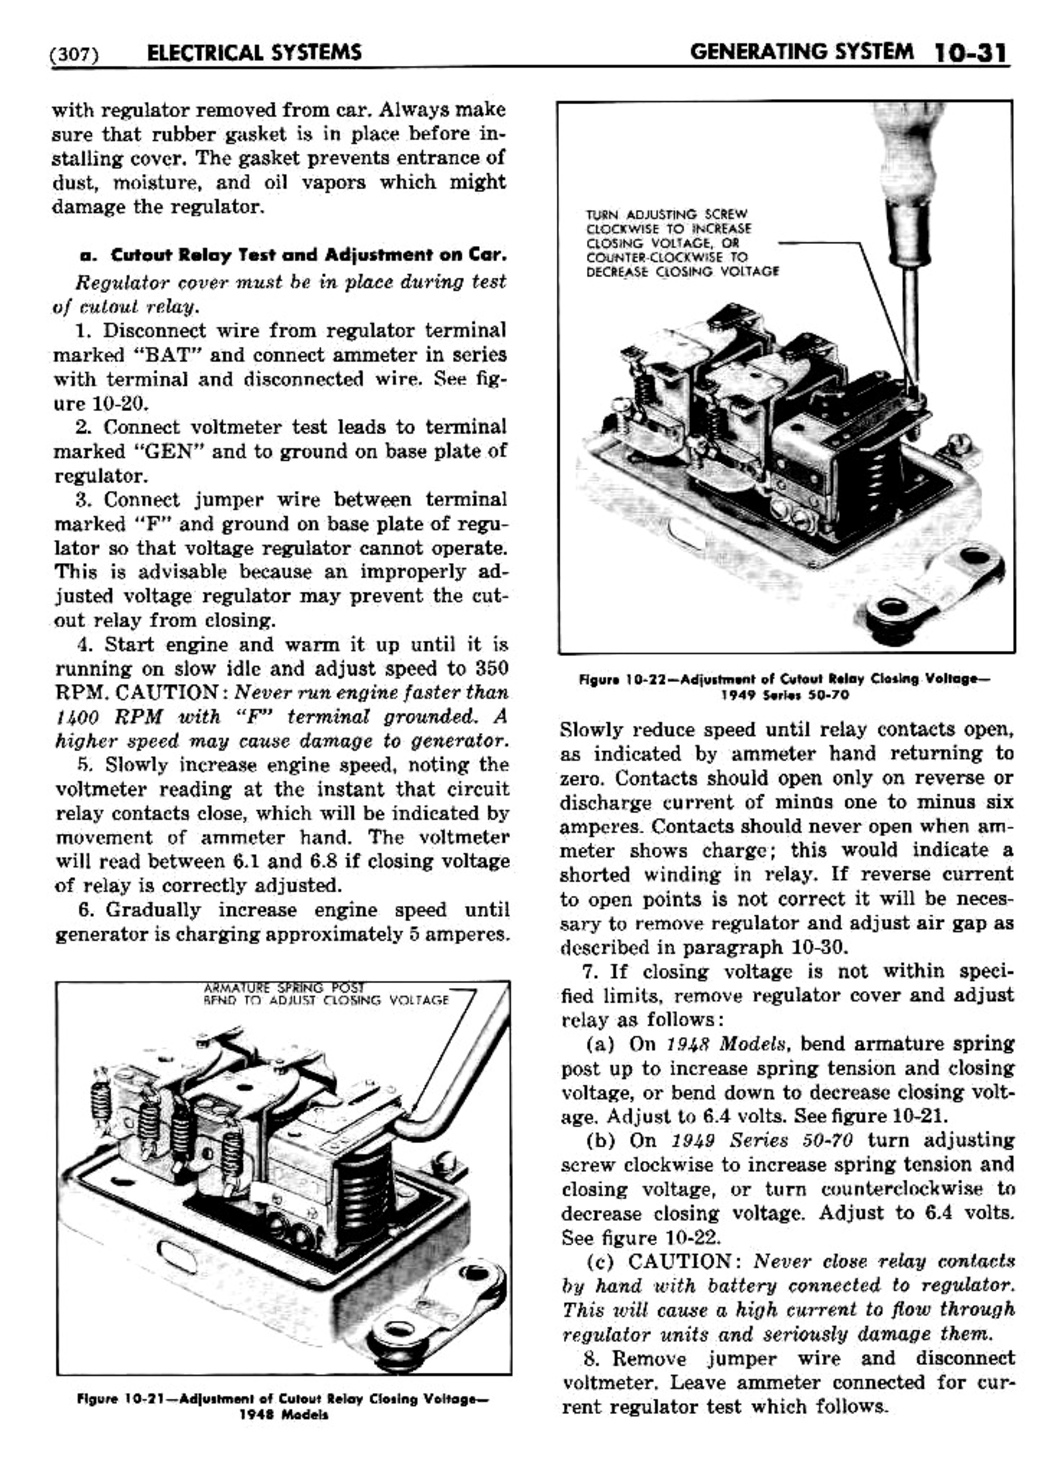 n_11 1948 Buick Shop Manual - Electrical Systems-031-031.jpg